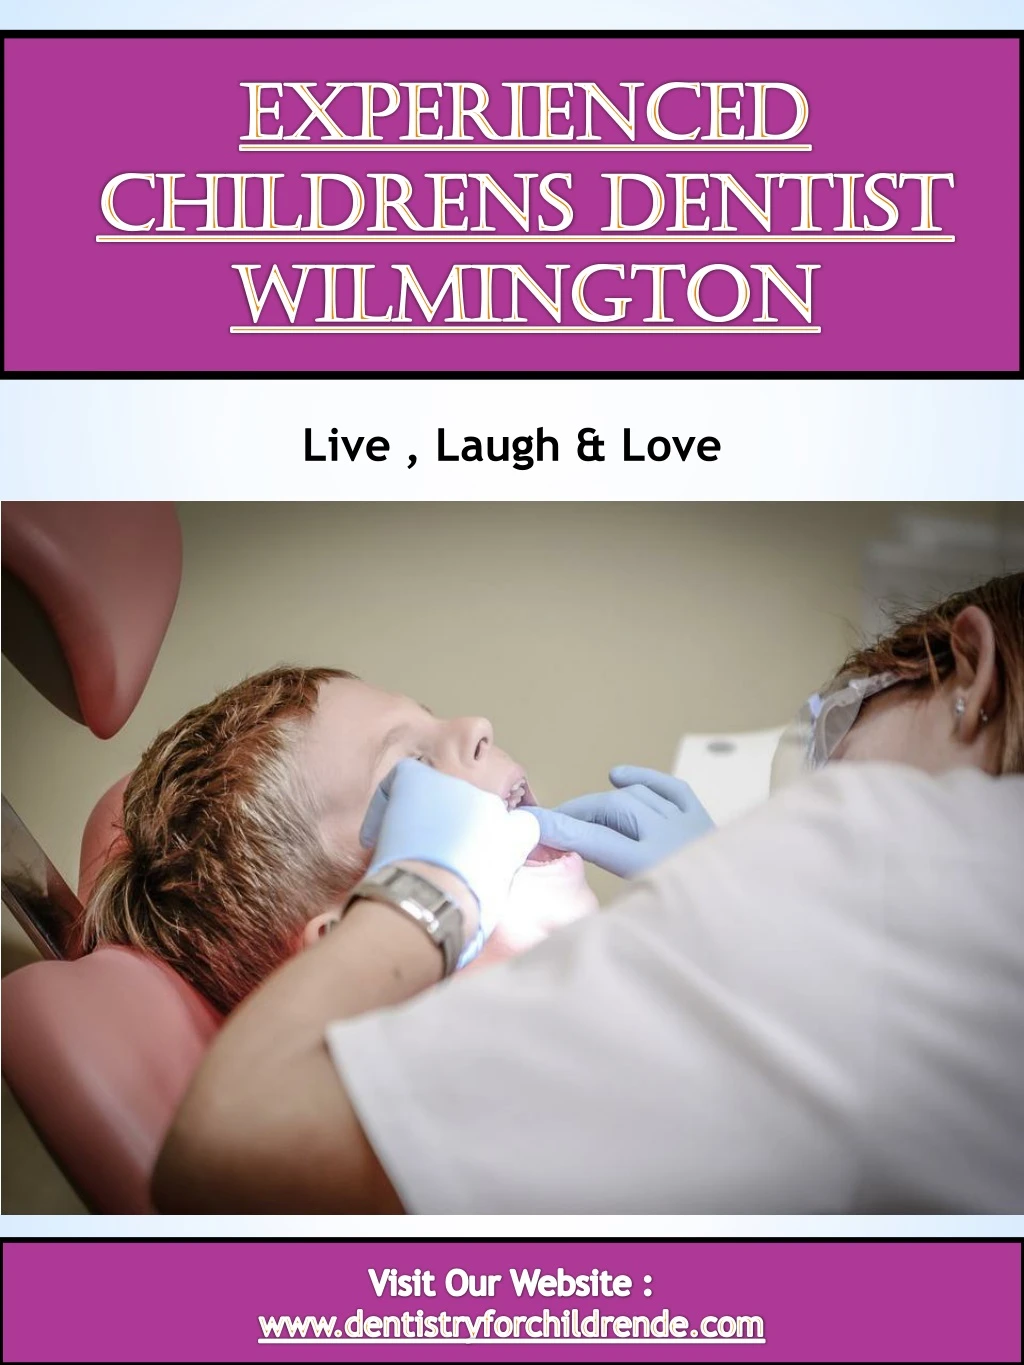 experienced childrens dentist wilmington